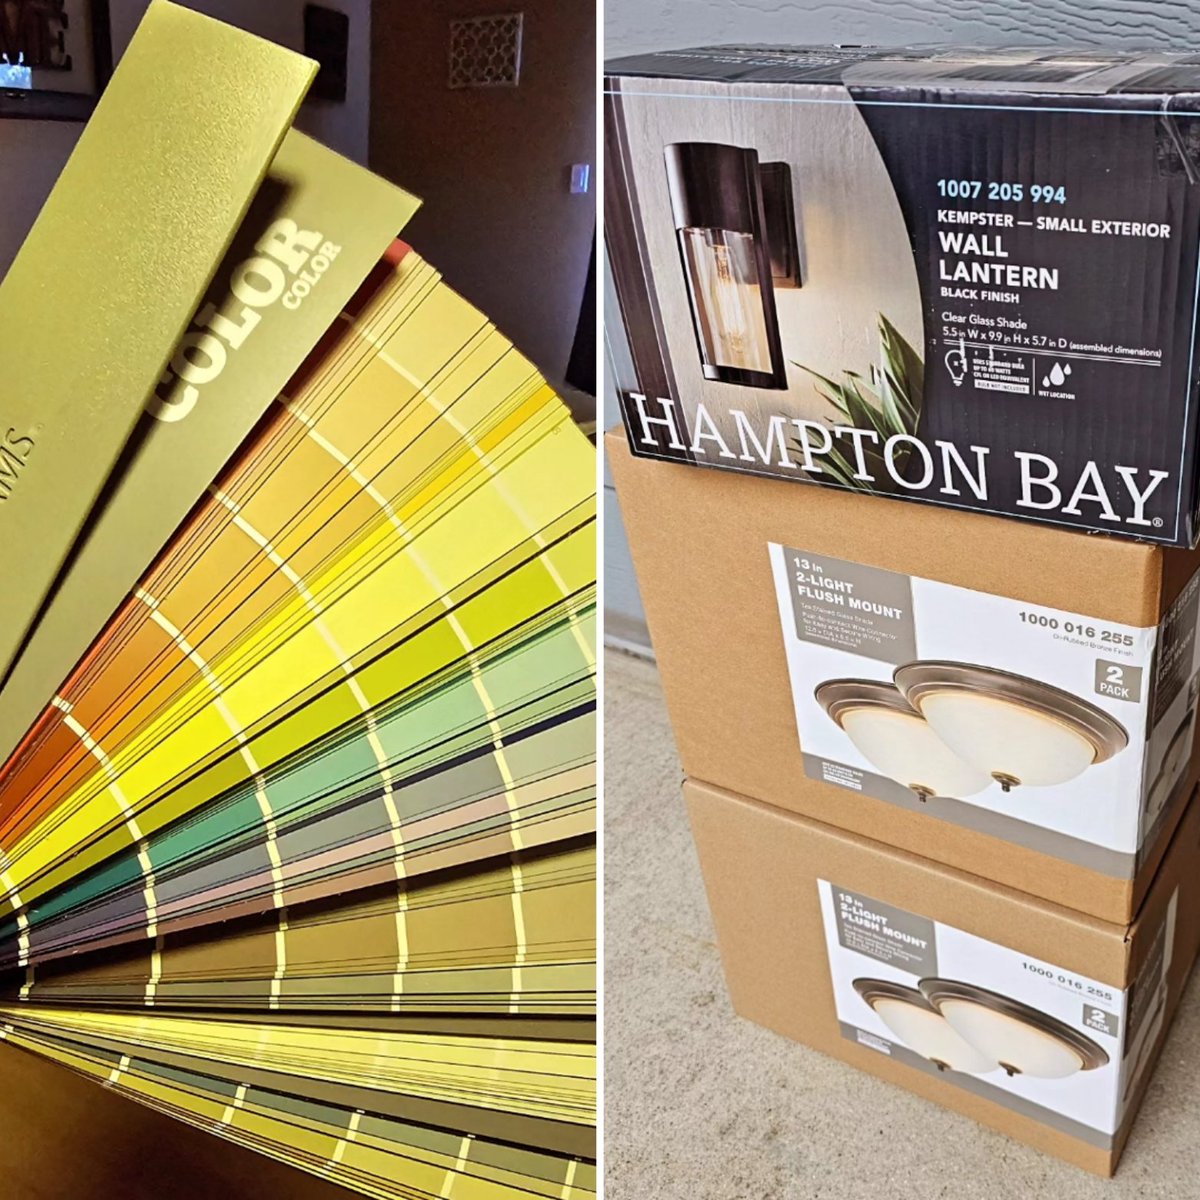 And so it begins... you know it's serious when you walk out of #sherwinwilliams with the entire paint swatch book 😂

#hupketeam #remax #remaxservicefirst #remaxservicefirstlakecountry #remaxhustle #house #home #realtor #realestate #fliporflop #investmentproperty